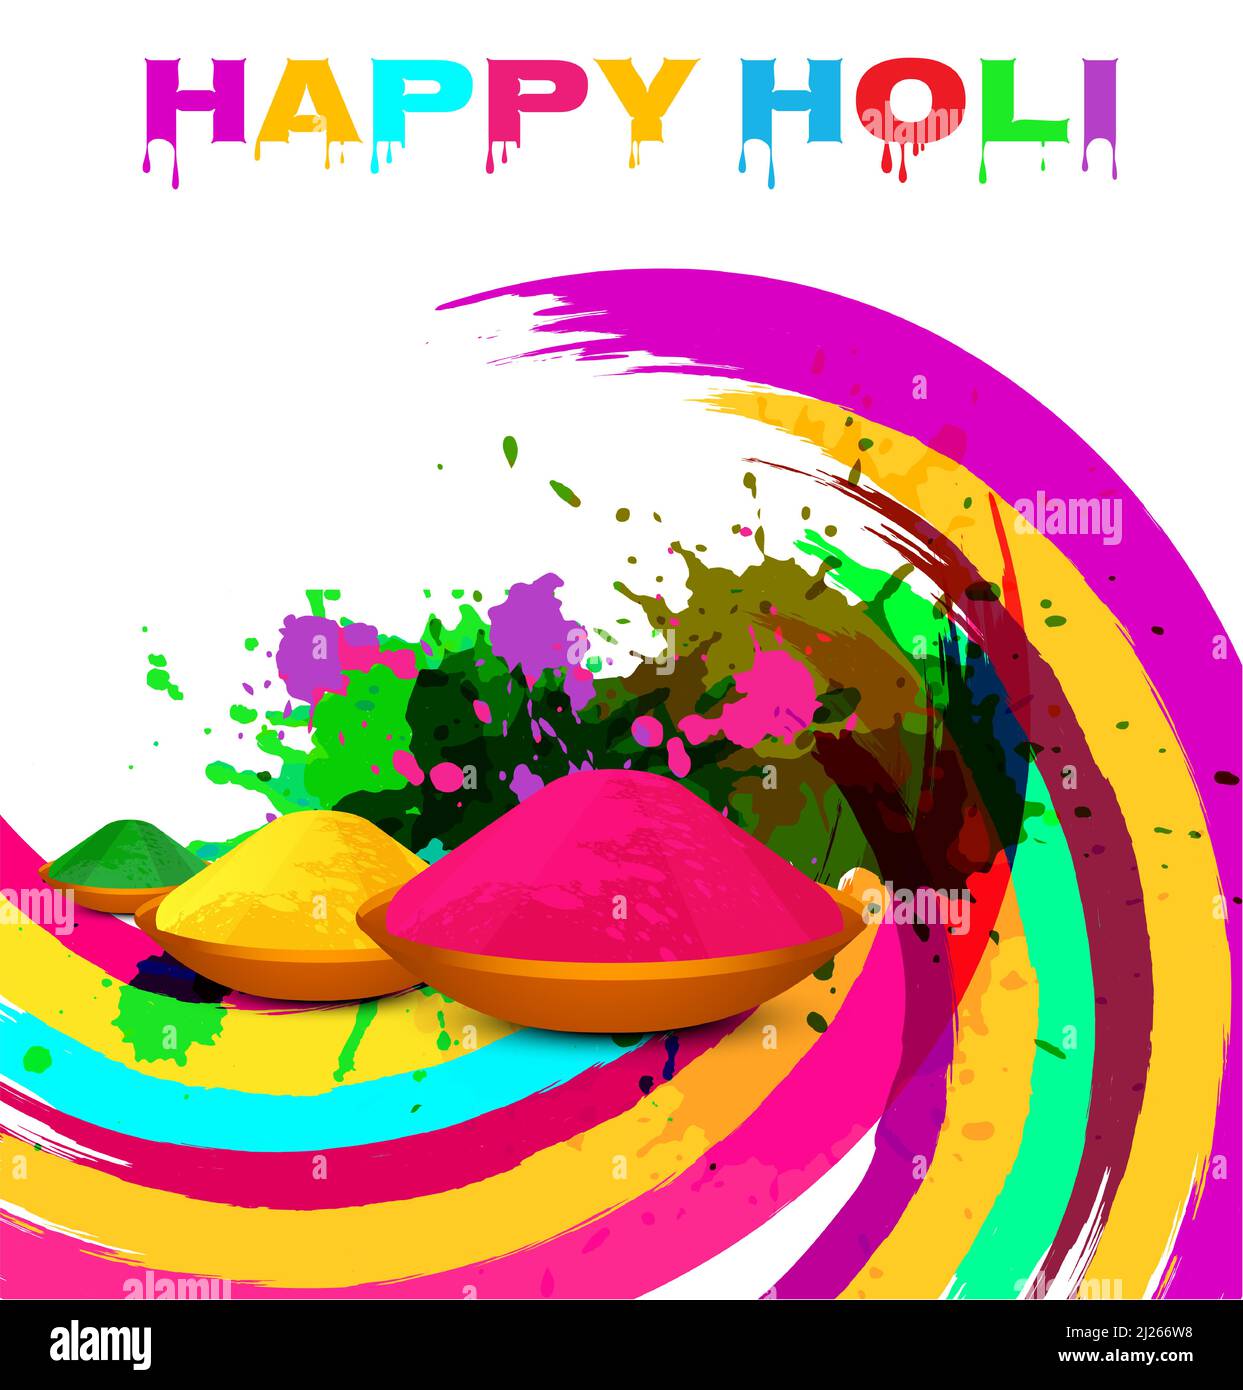 Happy Holi Greetings And Wishes Colorful Watercolor Background Stock Vector